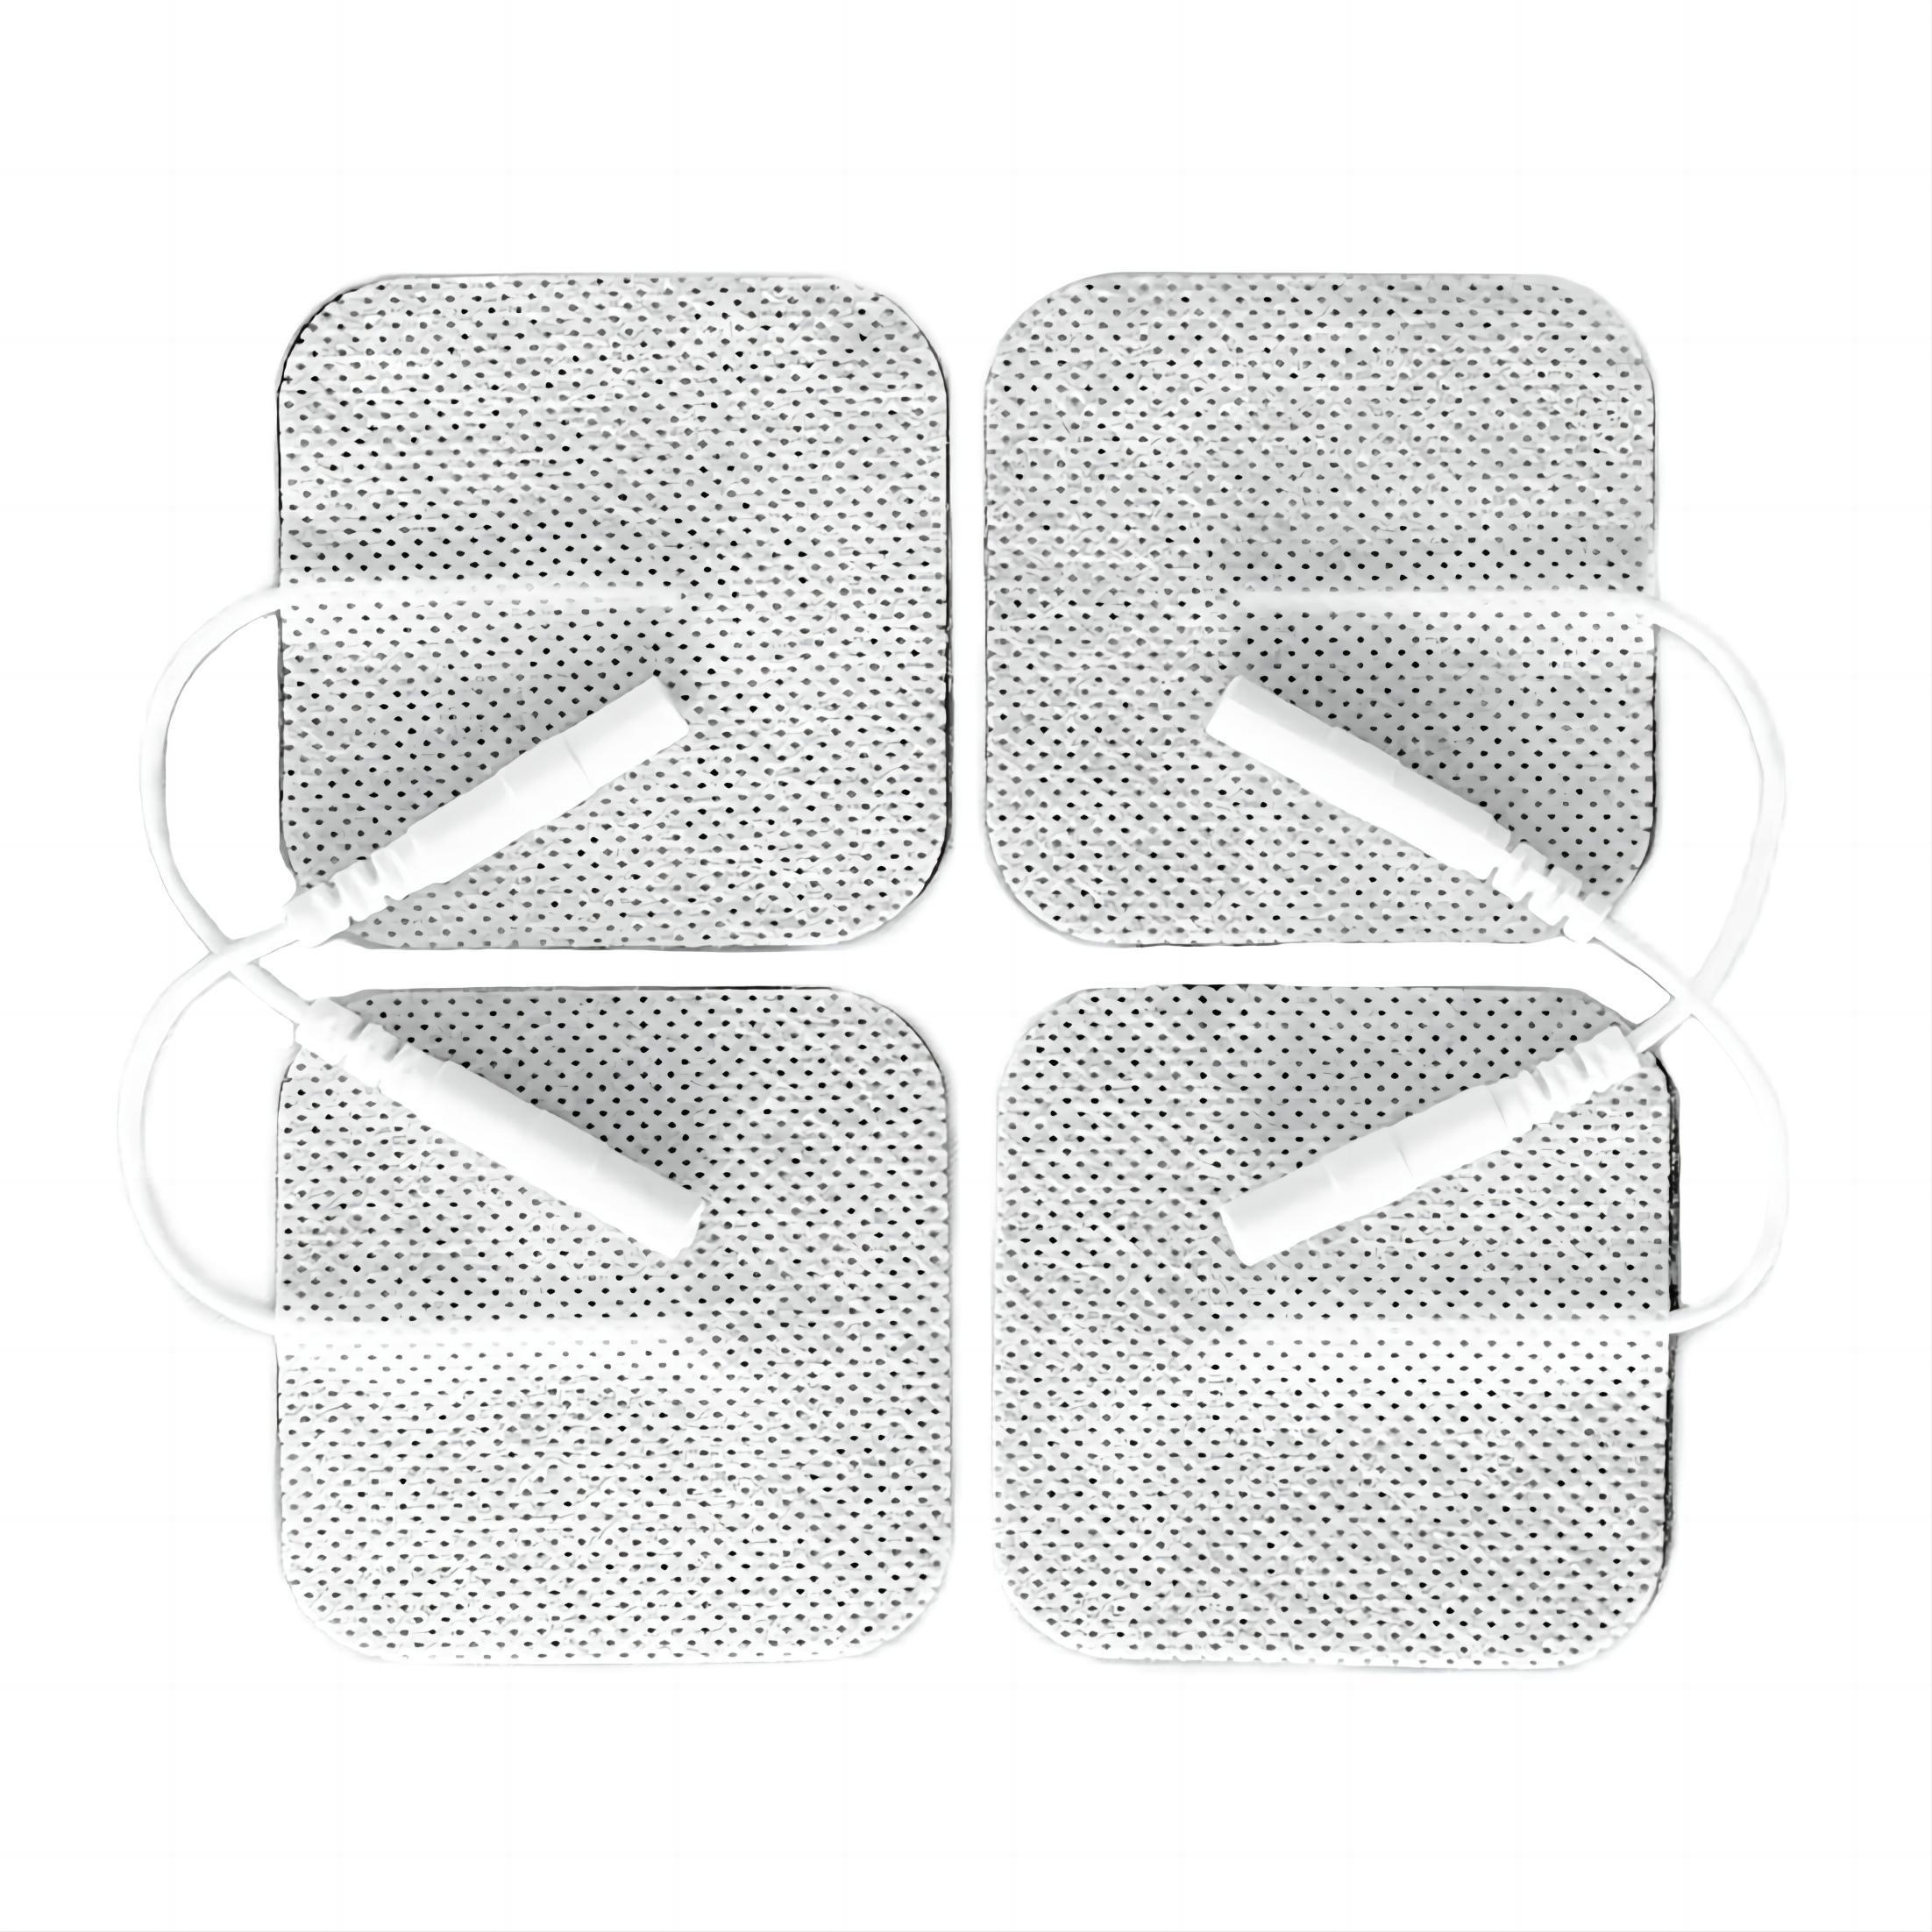 5*5cm Square Electrode Patches Sticky Hydrogel Pads Tens/EMS Units